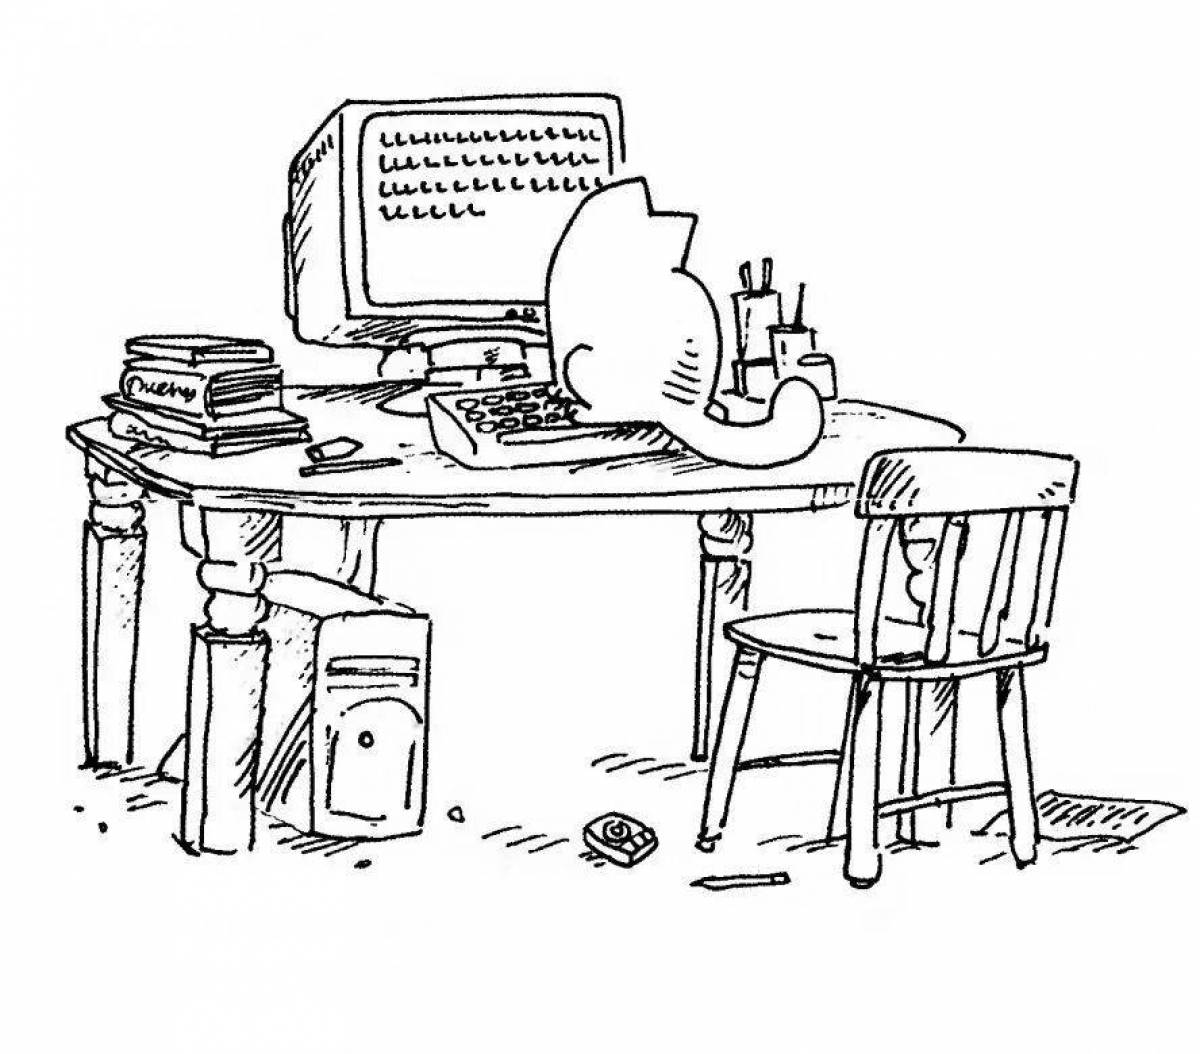 Coloring page charming programmer